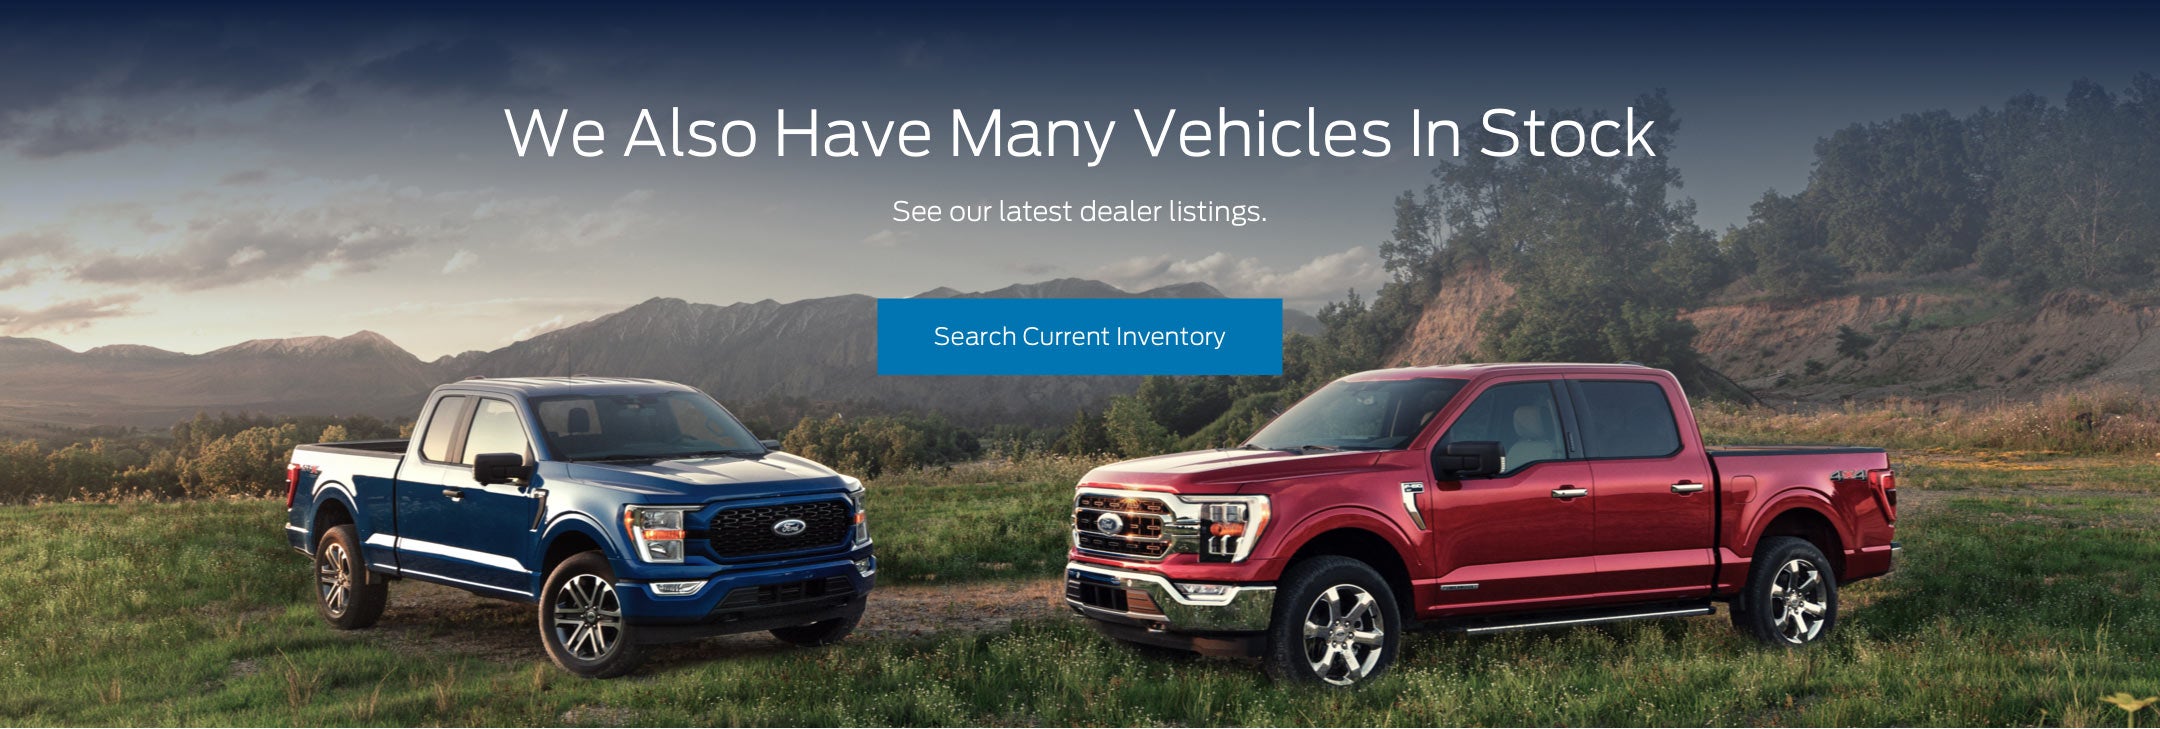 Ford vehicles in stock | Pinnacle Ford in Nicholasville KY